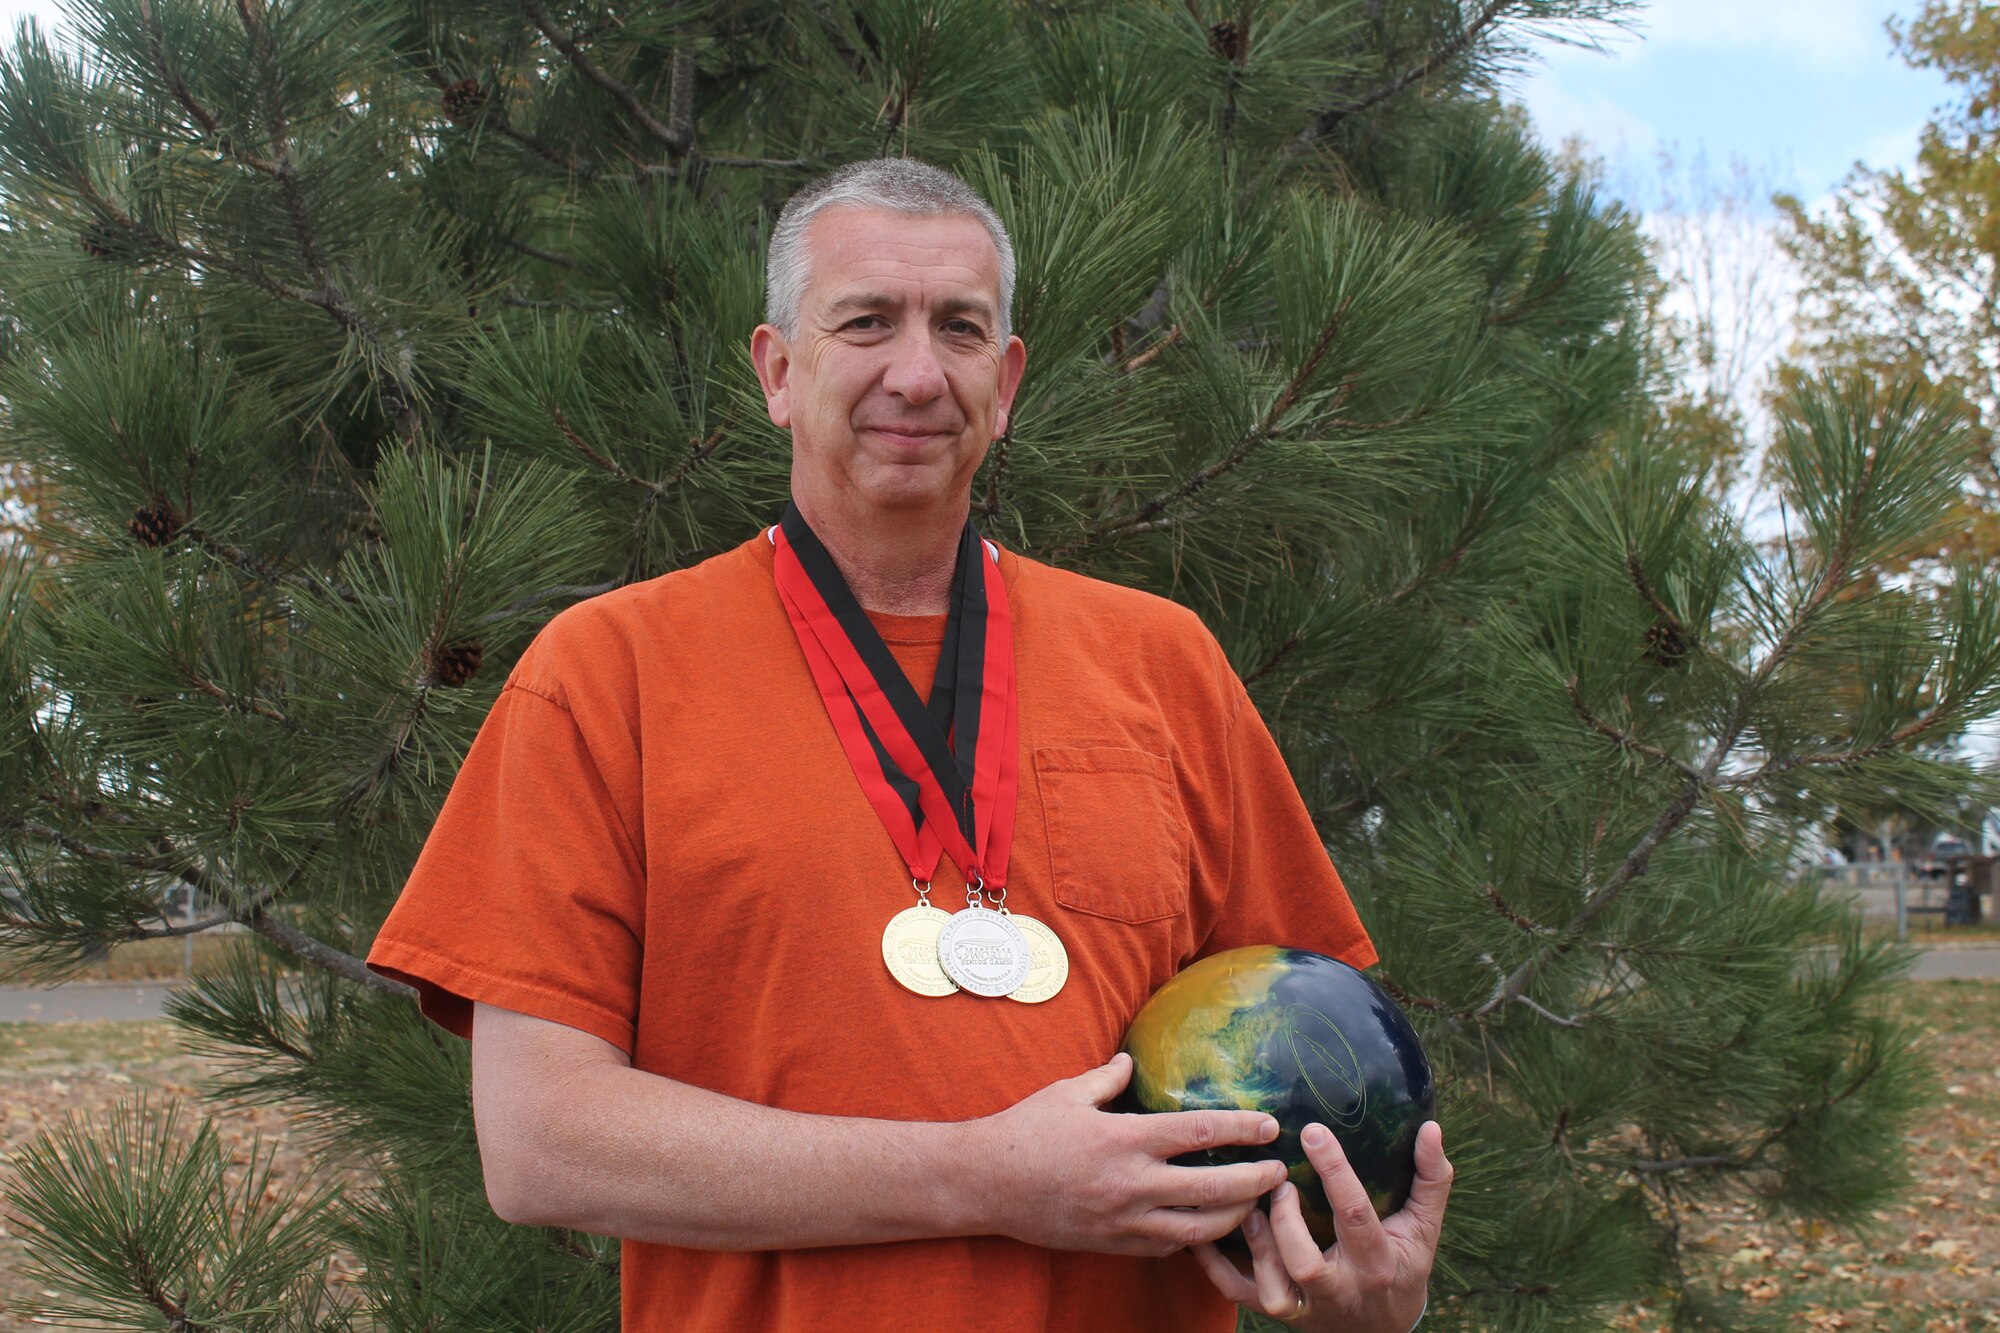 Jamie Wehner, supervisor for Material Support at the Ogden Air Logistics Complex, competed in the Huntsman World Senior Games in St. George and received two gold medals for his division, one in the singles scratch and the other in all-events scratch, and a silver medal in doubles handicap. (Photo by Dana Rimington)